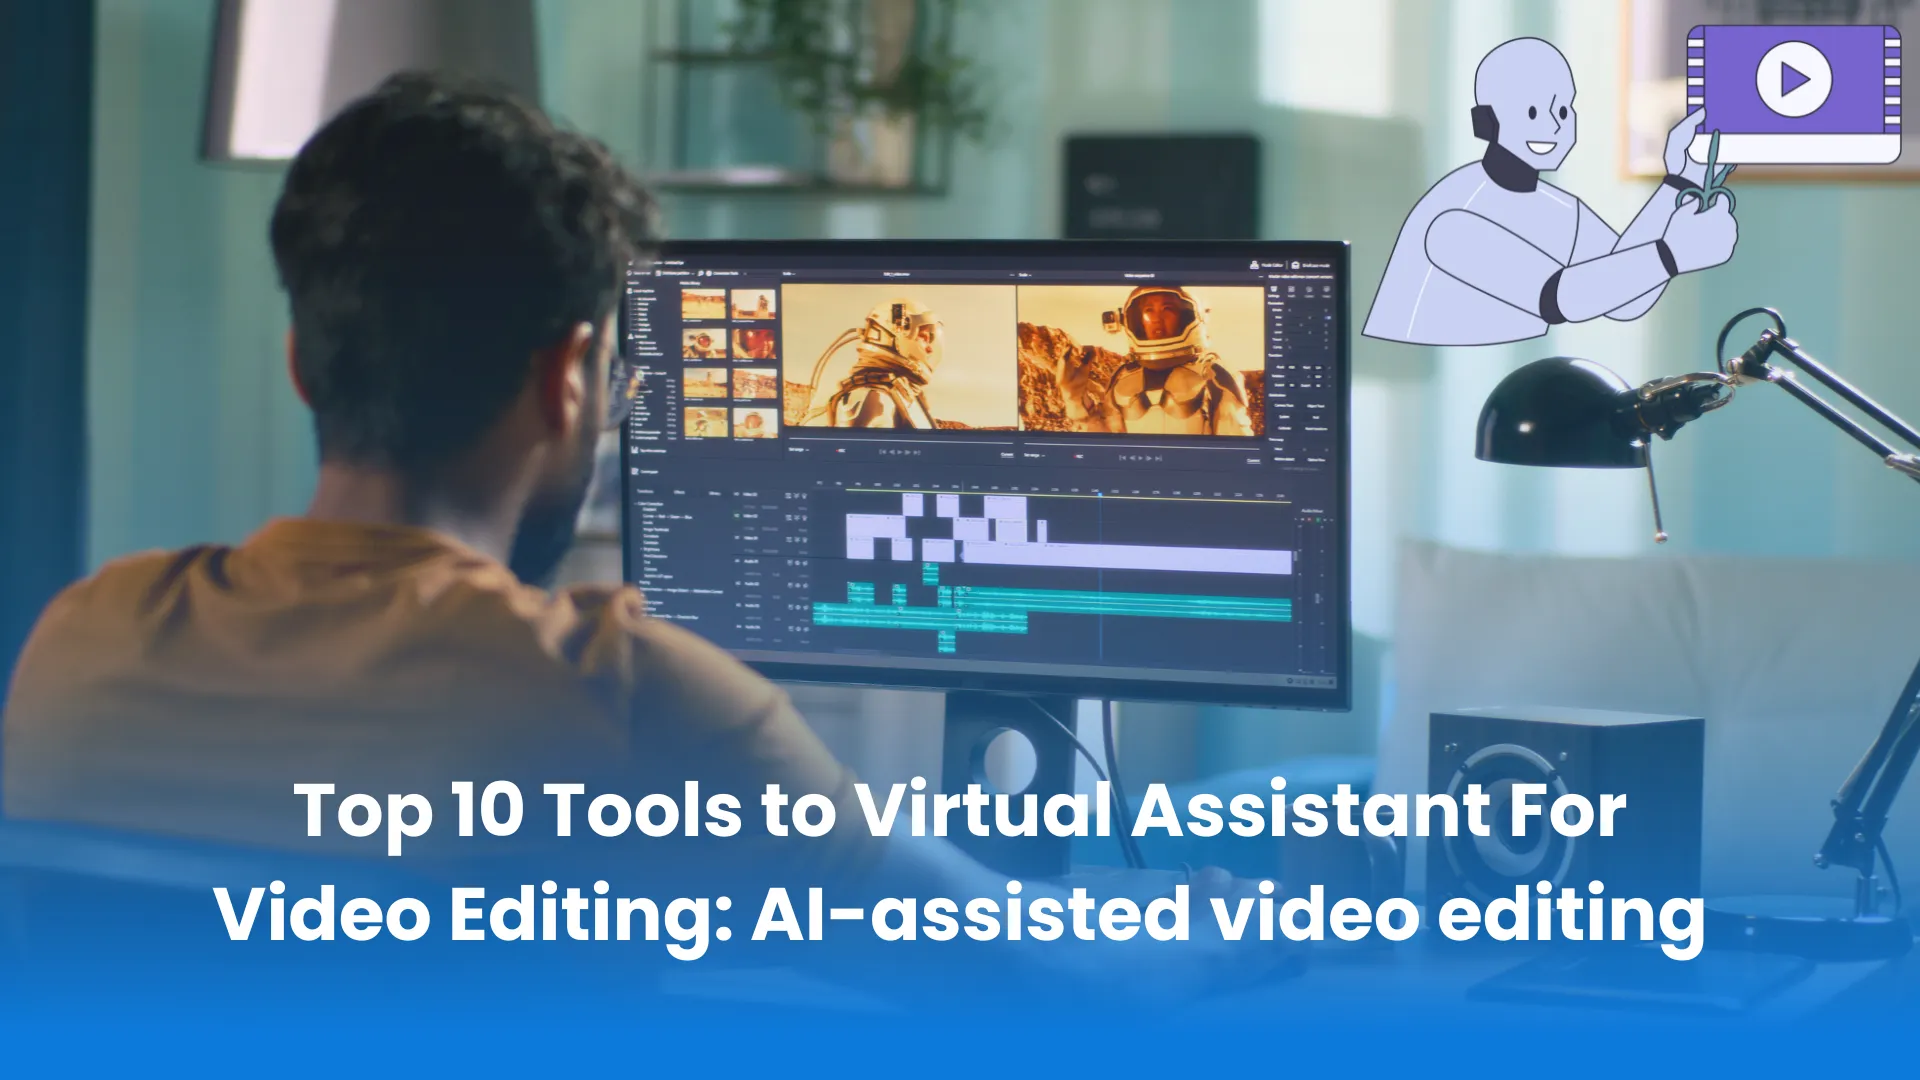 Top 10 Tools to Virtual Assistant For Video Editing: AI-assisted video editing